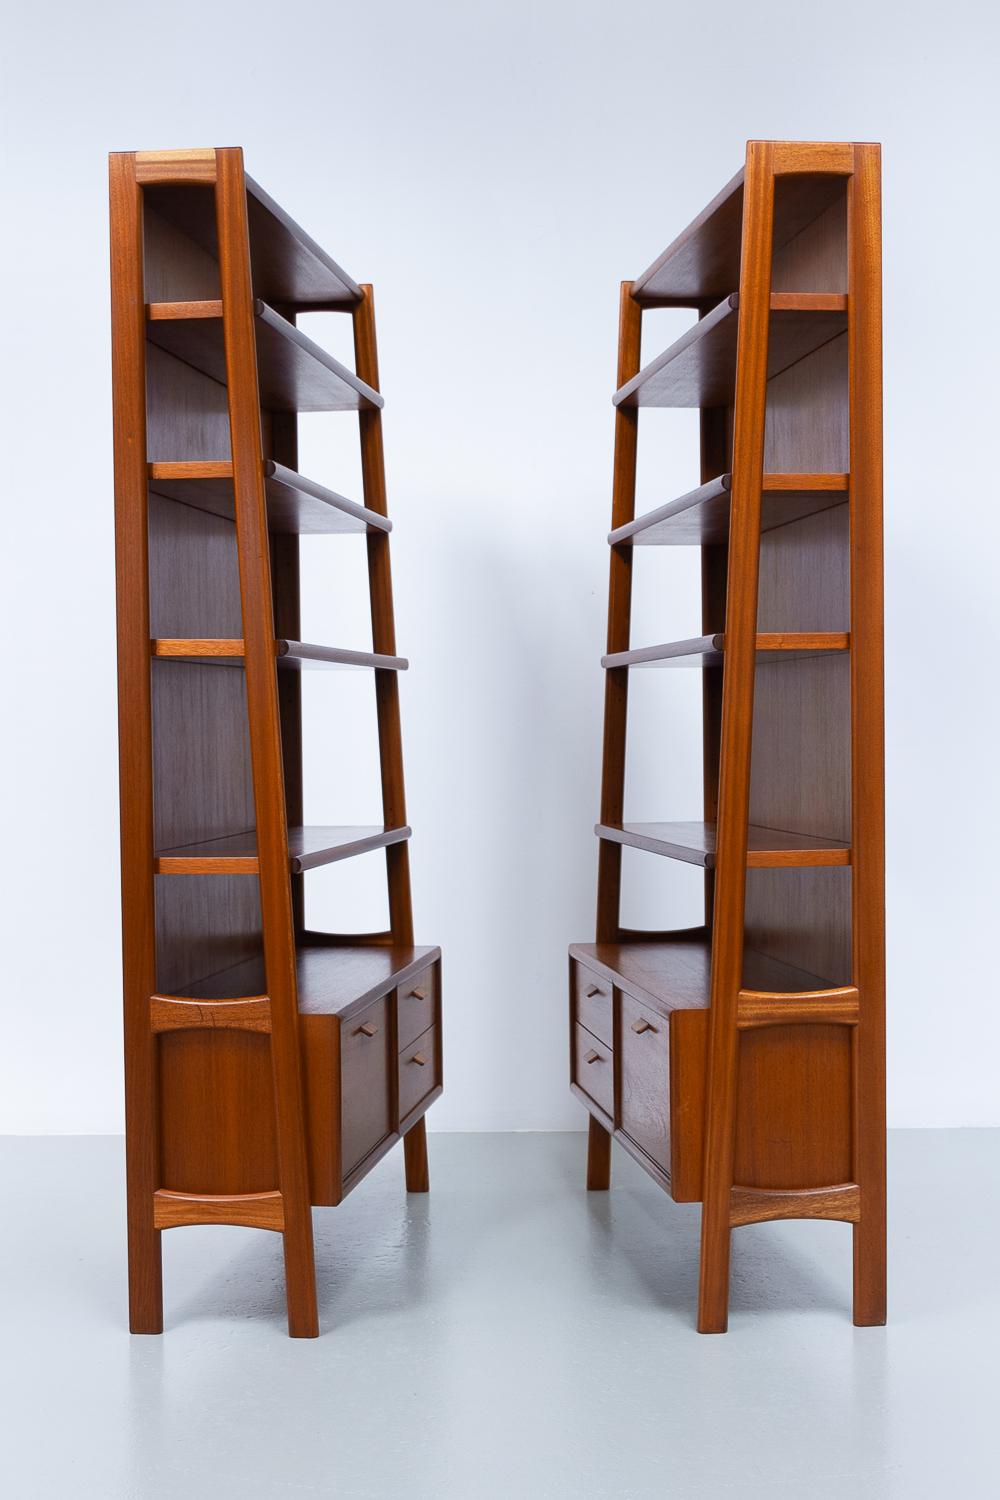 Scandinavian Mid-Century Modern 1960s elegant freestanding shelving units attributed to Danish architect Poul M. Volther. Manufactured in Denmark in the 1960s.

Opulent tapered design in a light golden mahogany, each with four height adjustable